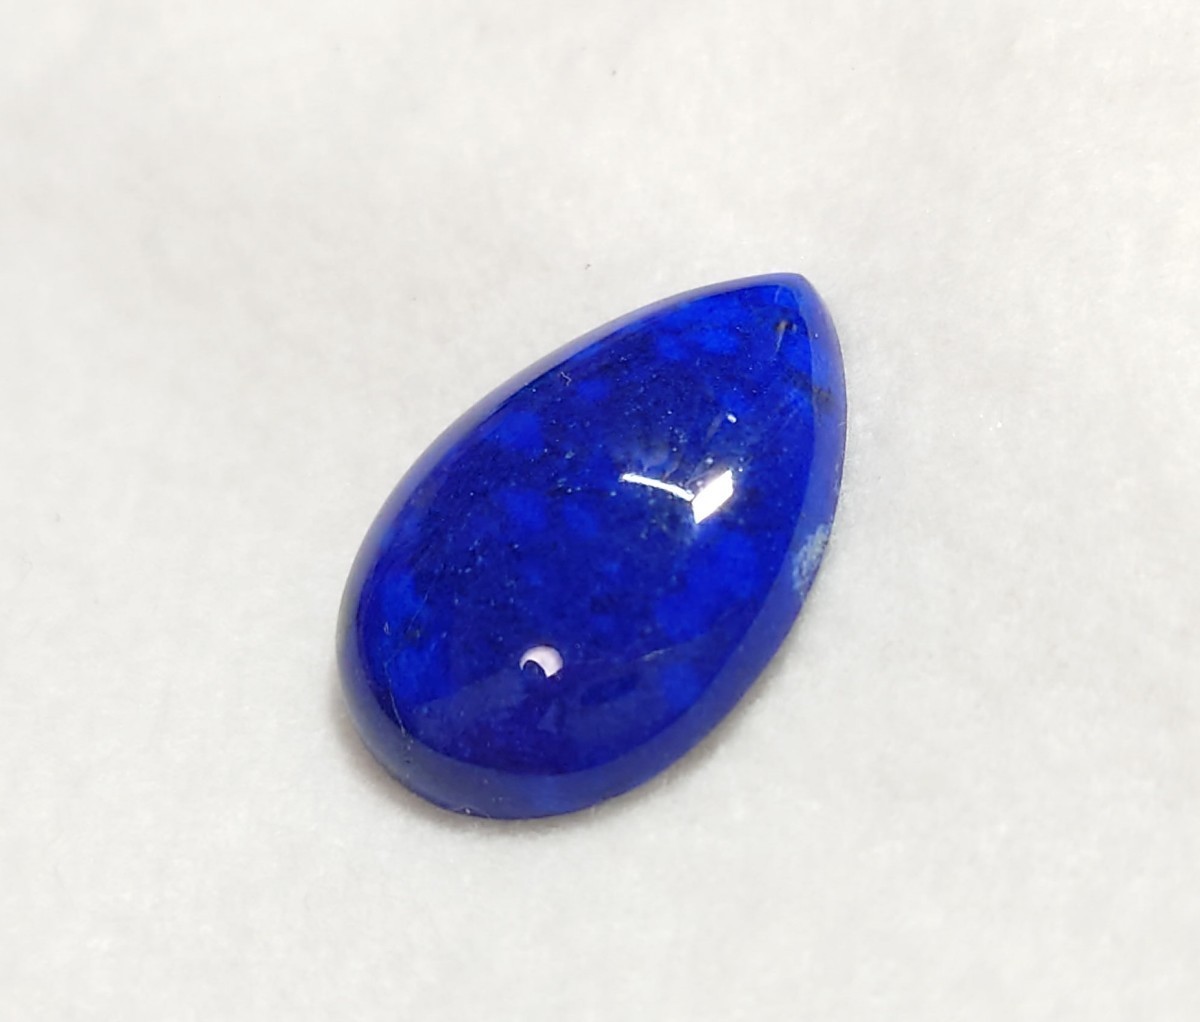  lapis lazuli 17.41ct loose can equipped (LA-6587)